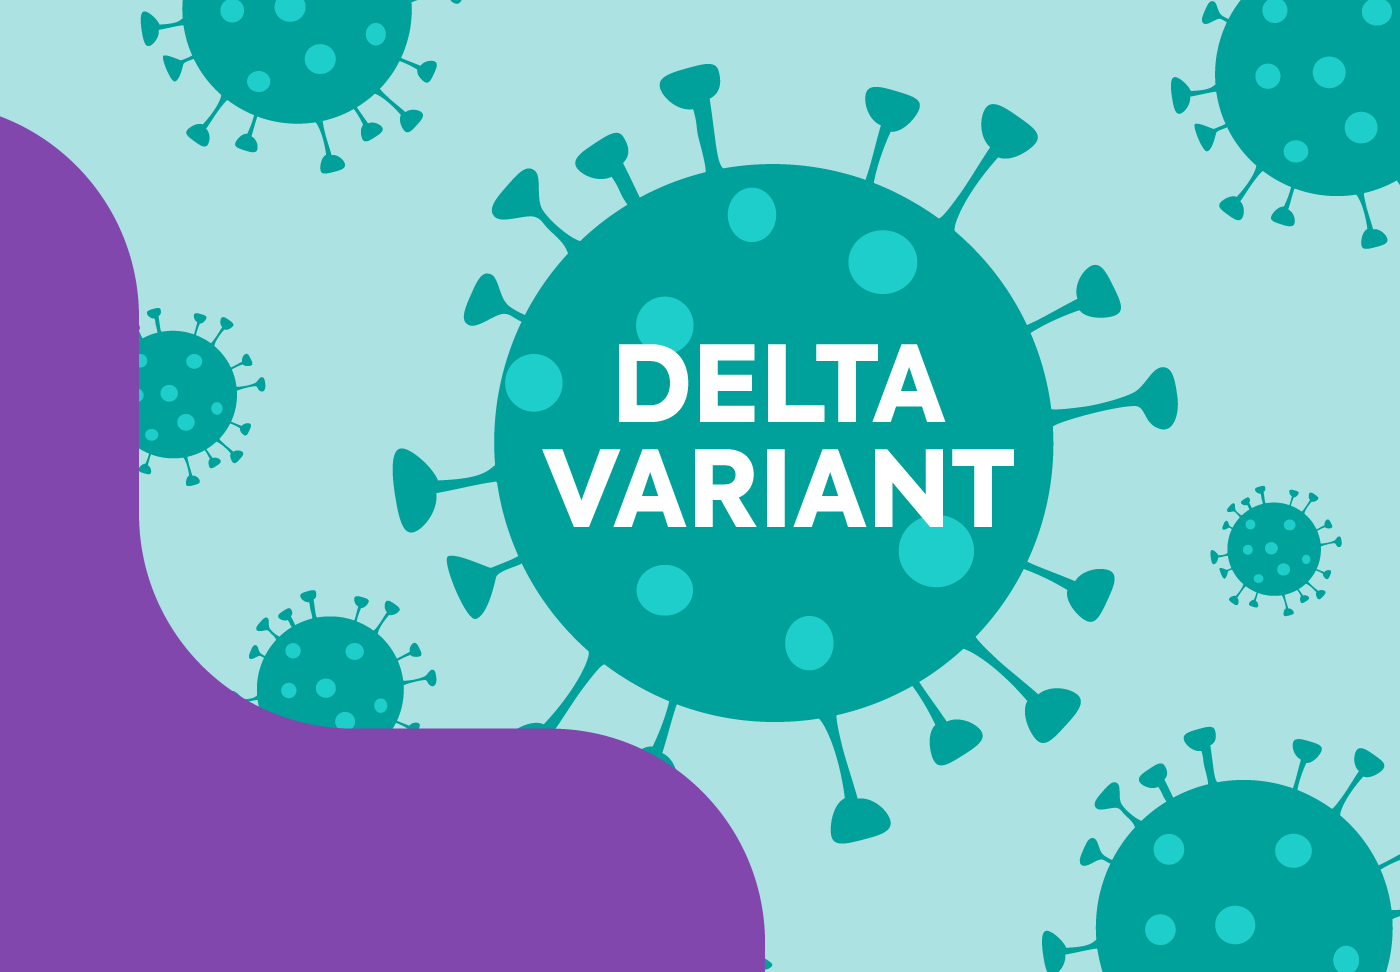 Image of COVID cell with text "Delta Variant"